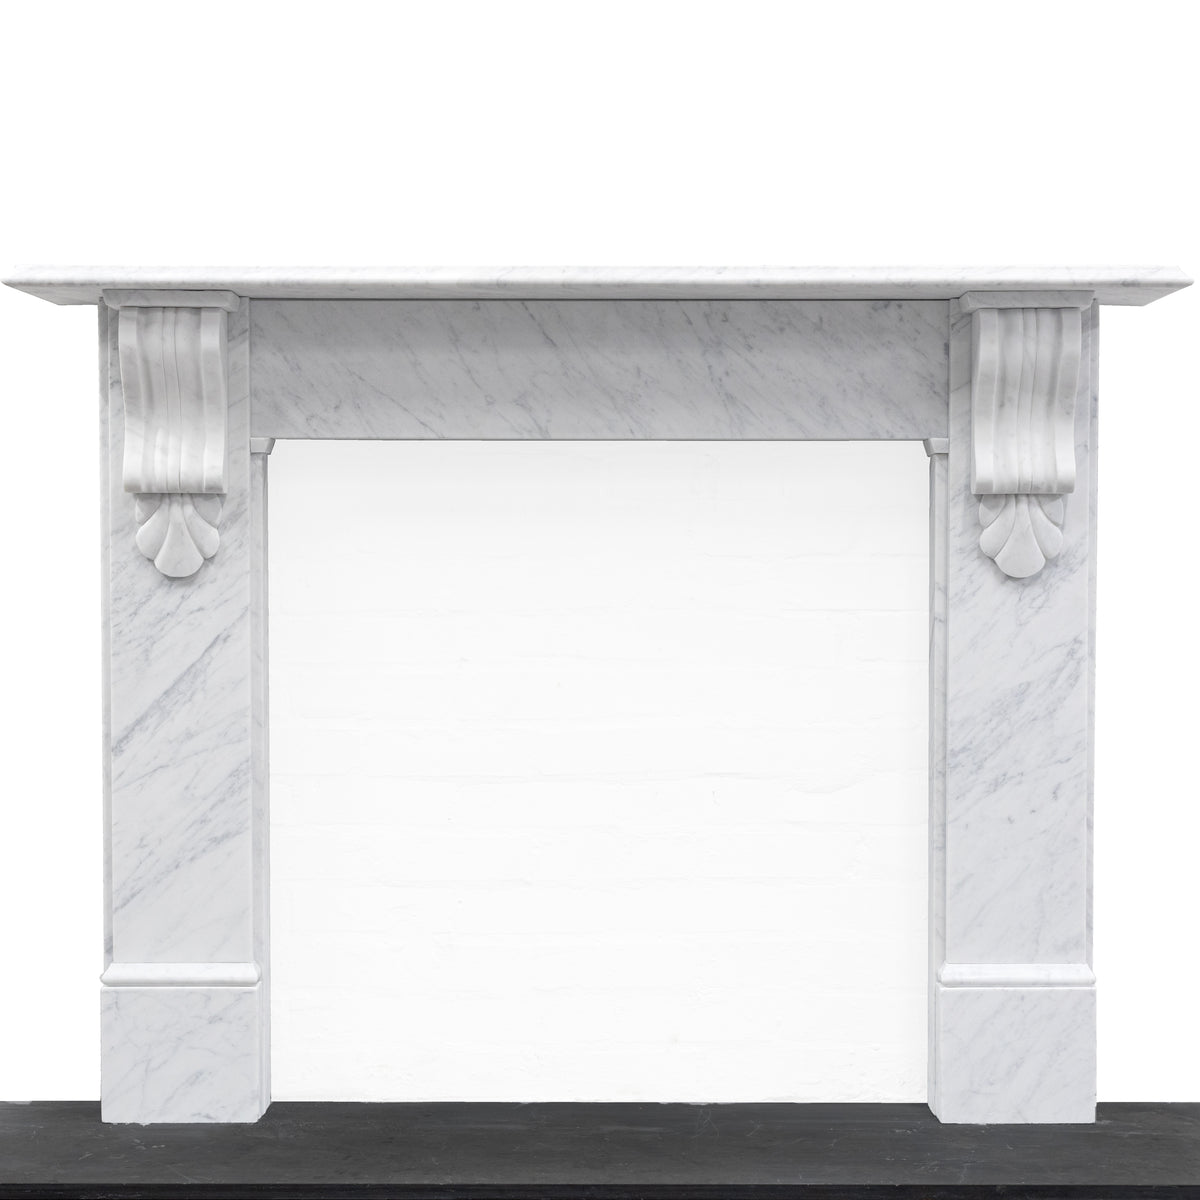 Victorian Style Surround With Corbels | Reclaimed Carrara Marble | Standard Size | The Architectural Forum